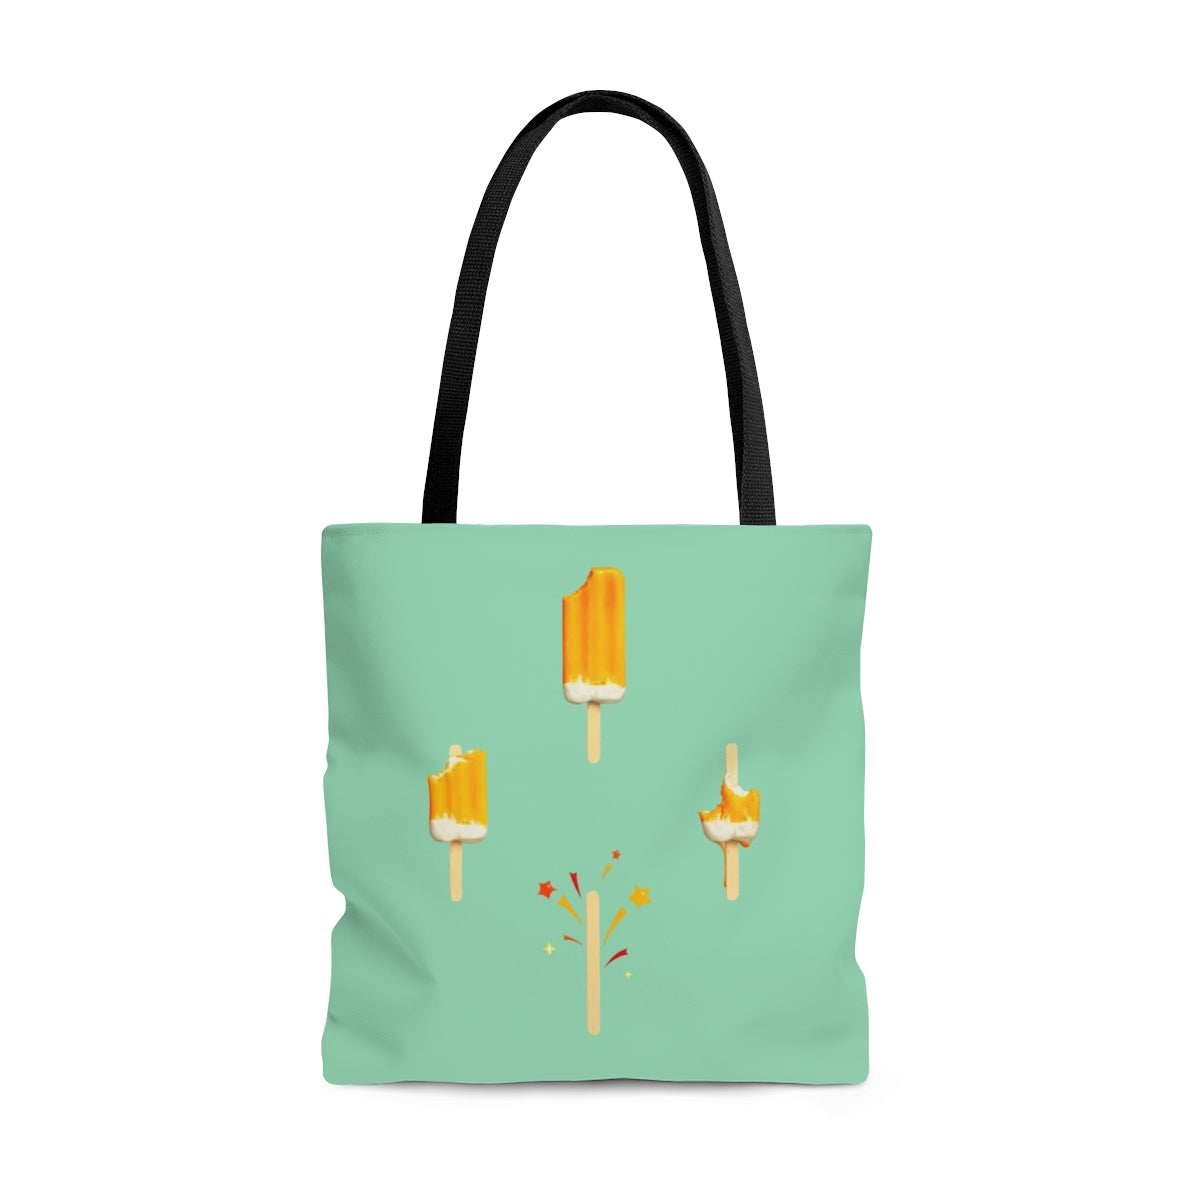 Beth Sistrunk: "Going Going Gone" - Tote Bag